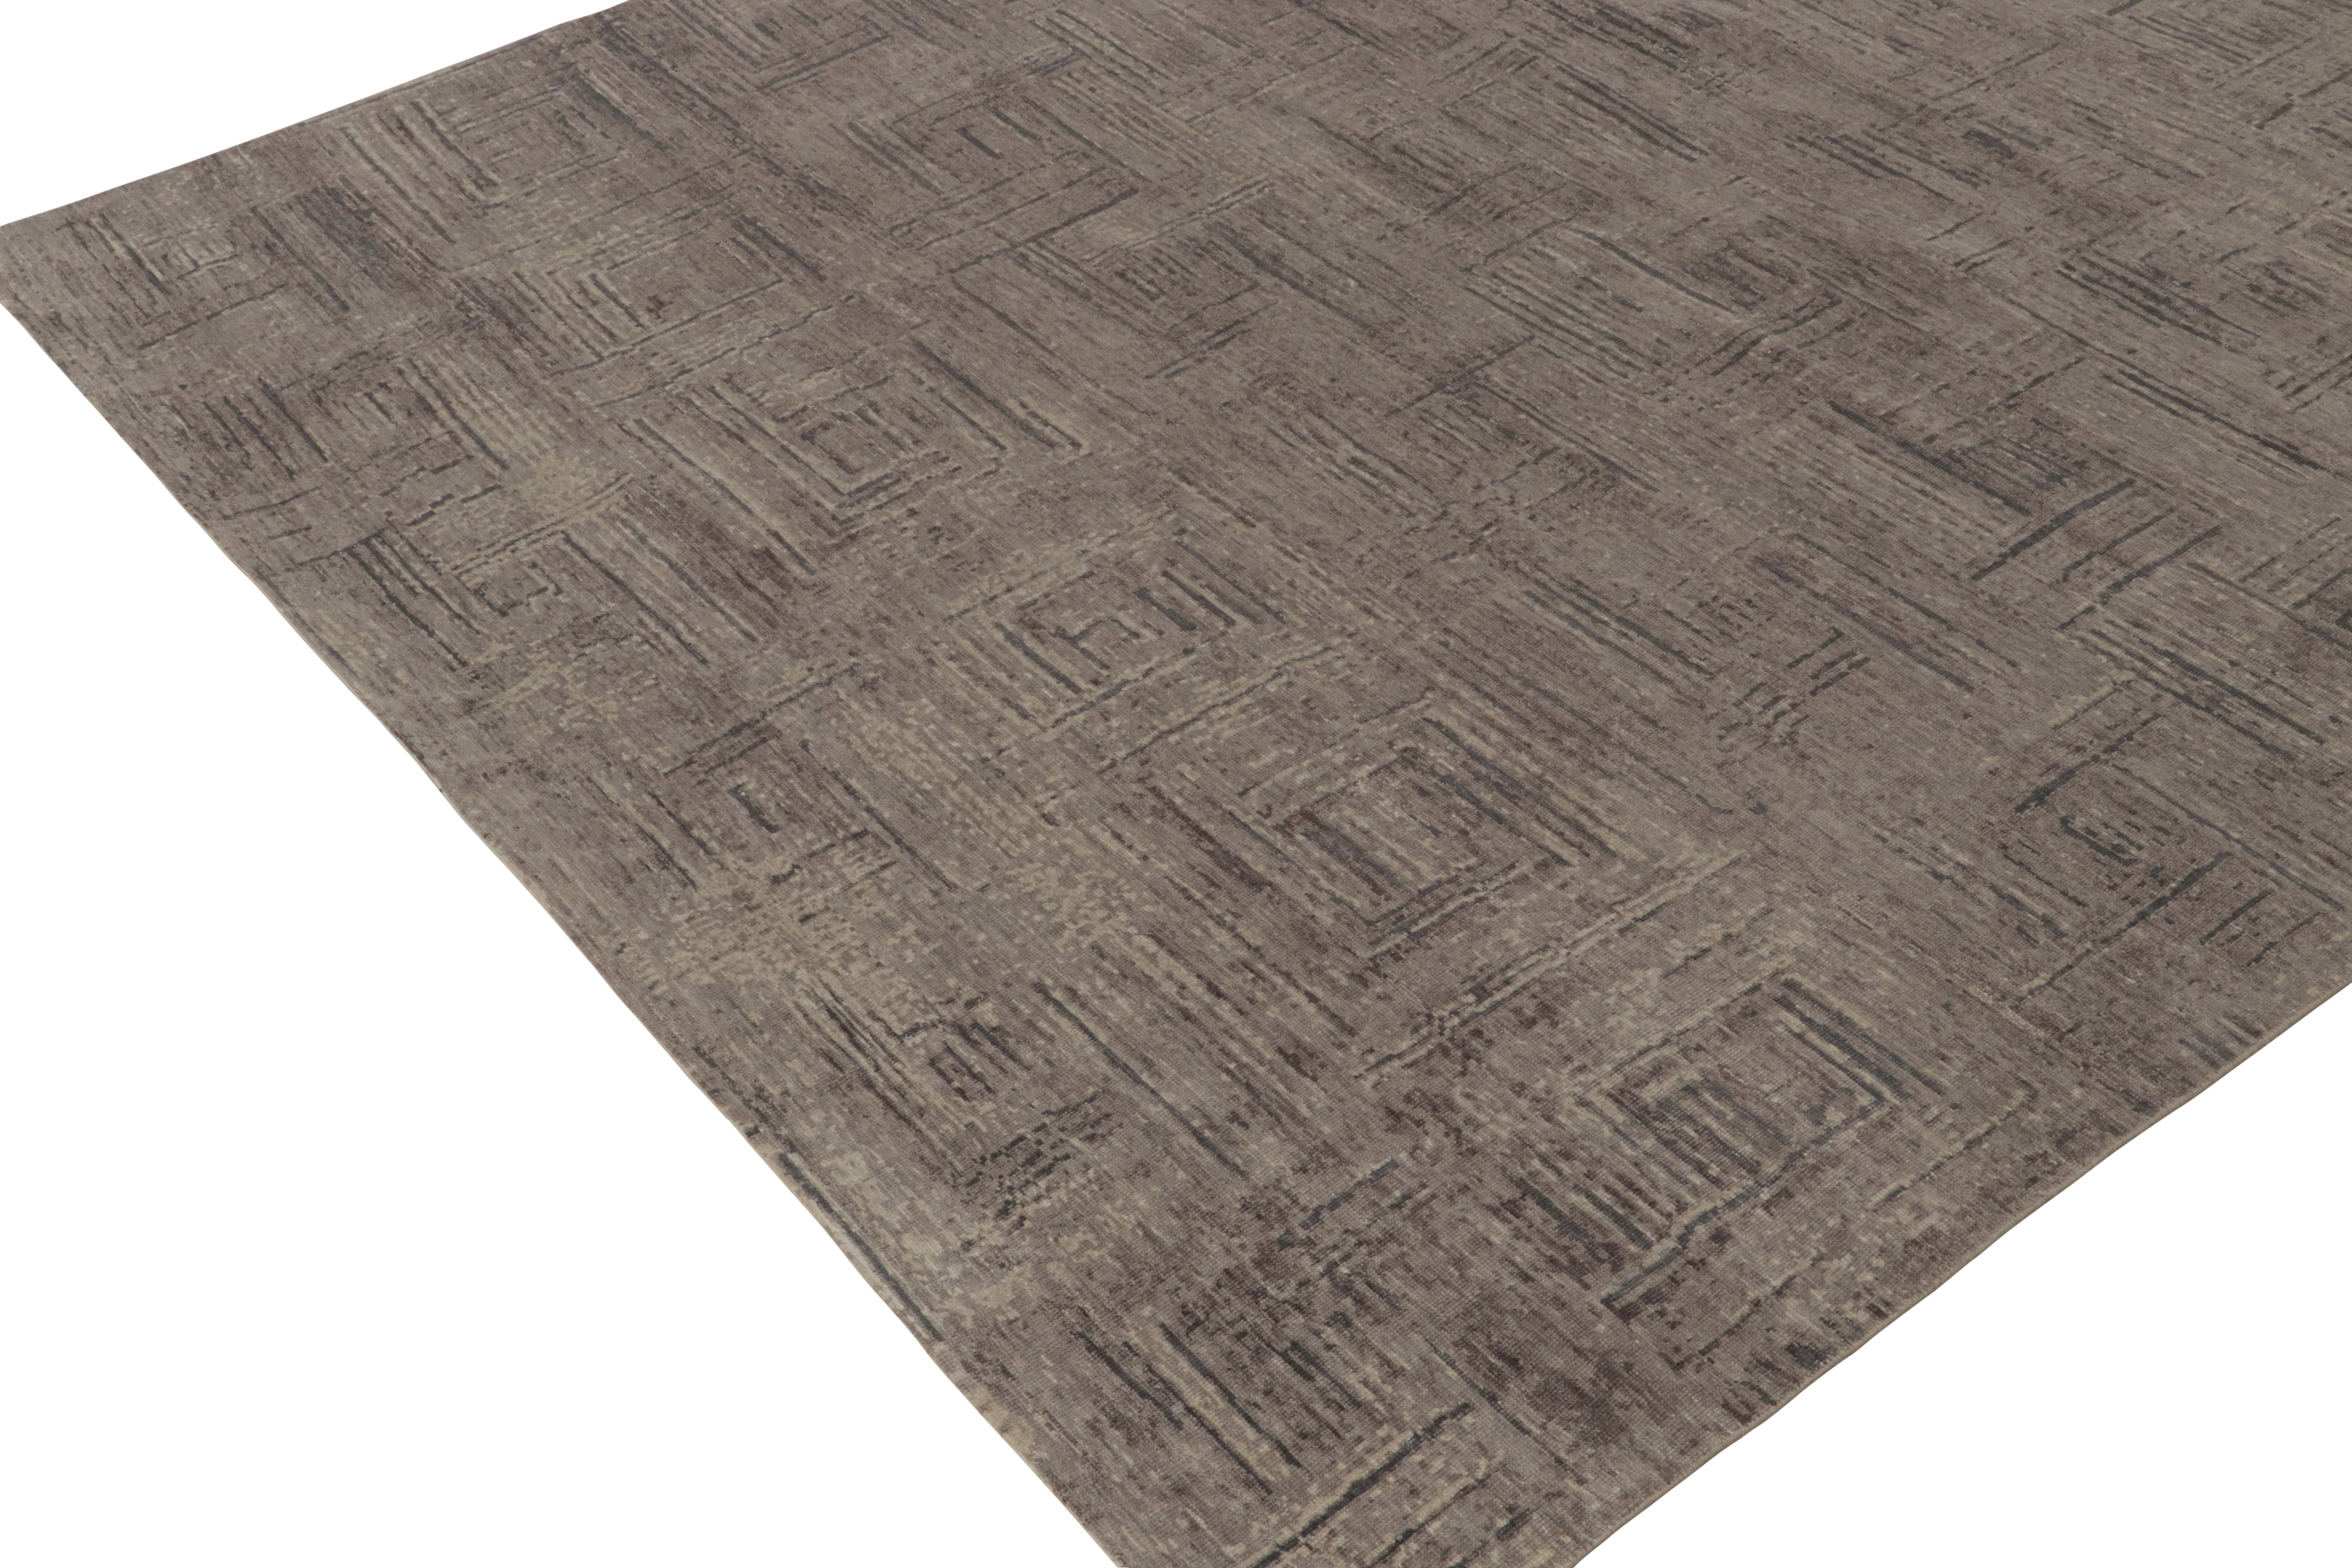 Indian Rug & Kilim's Hand-Knotted Abstract Rug in Gray, Beige-Brown Geometric Pattern For Sale